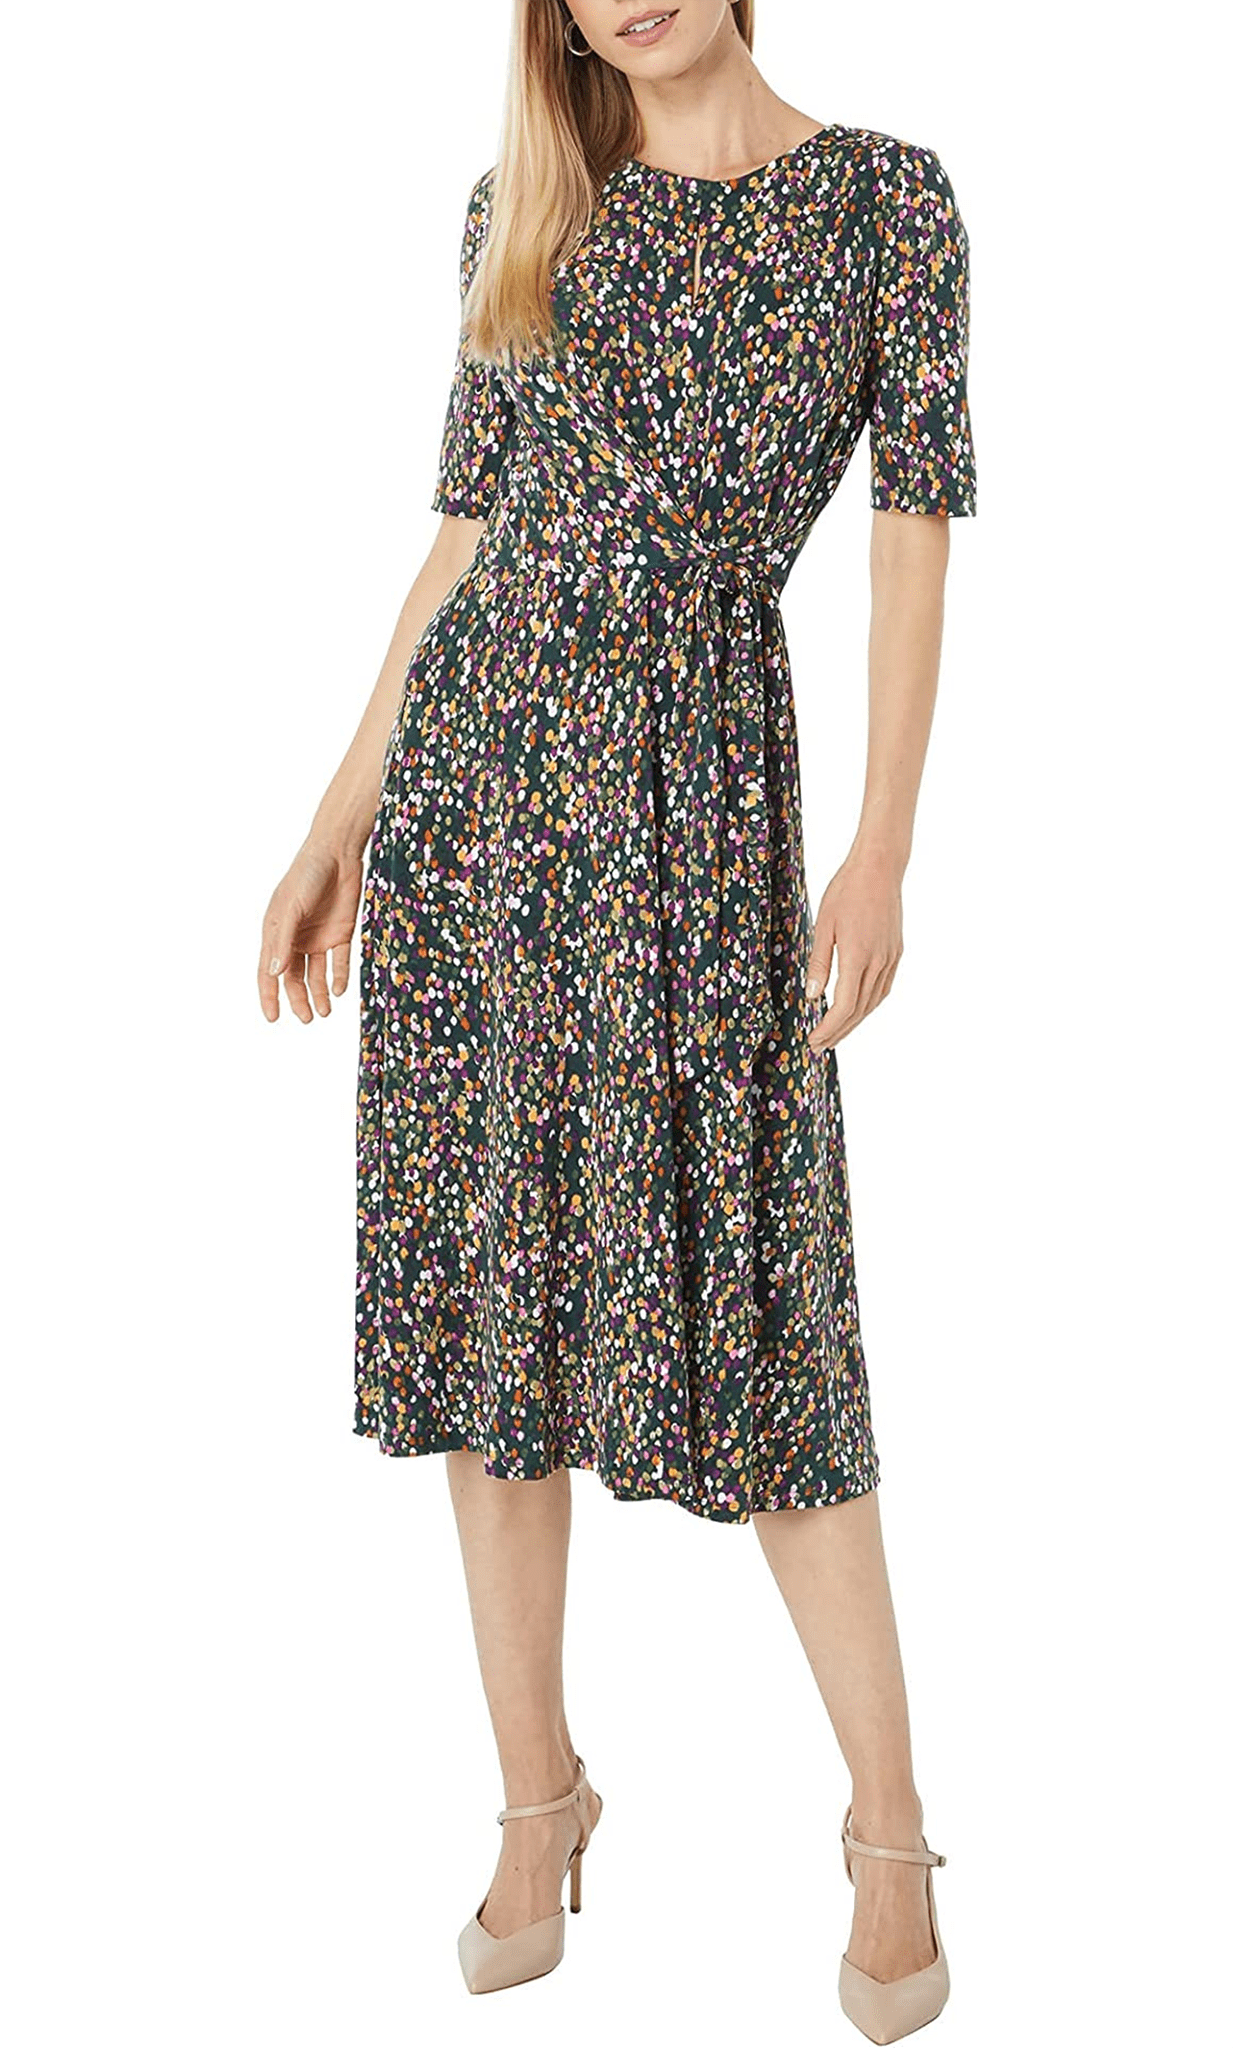 Image of London Times T6041M - Round Neck Printed Dress